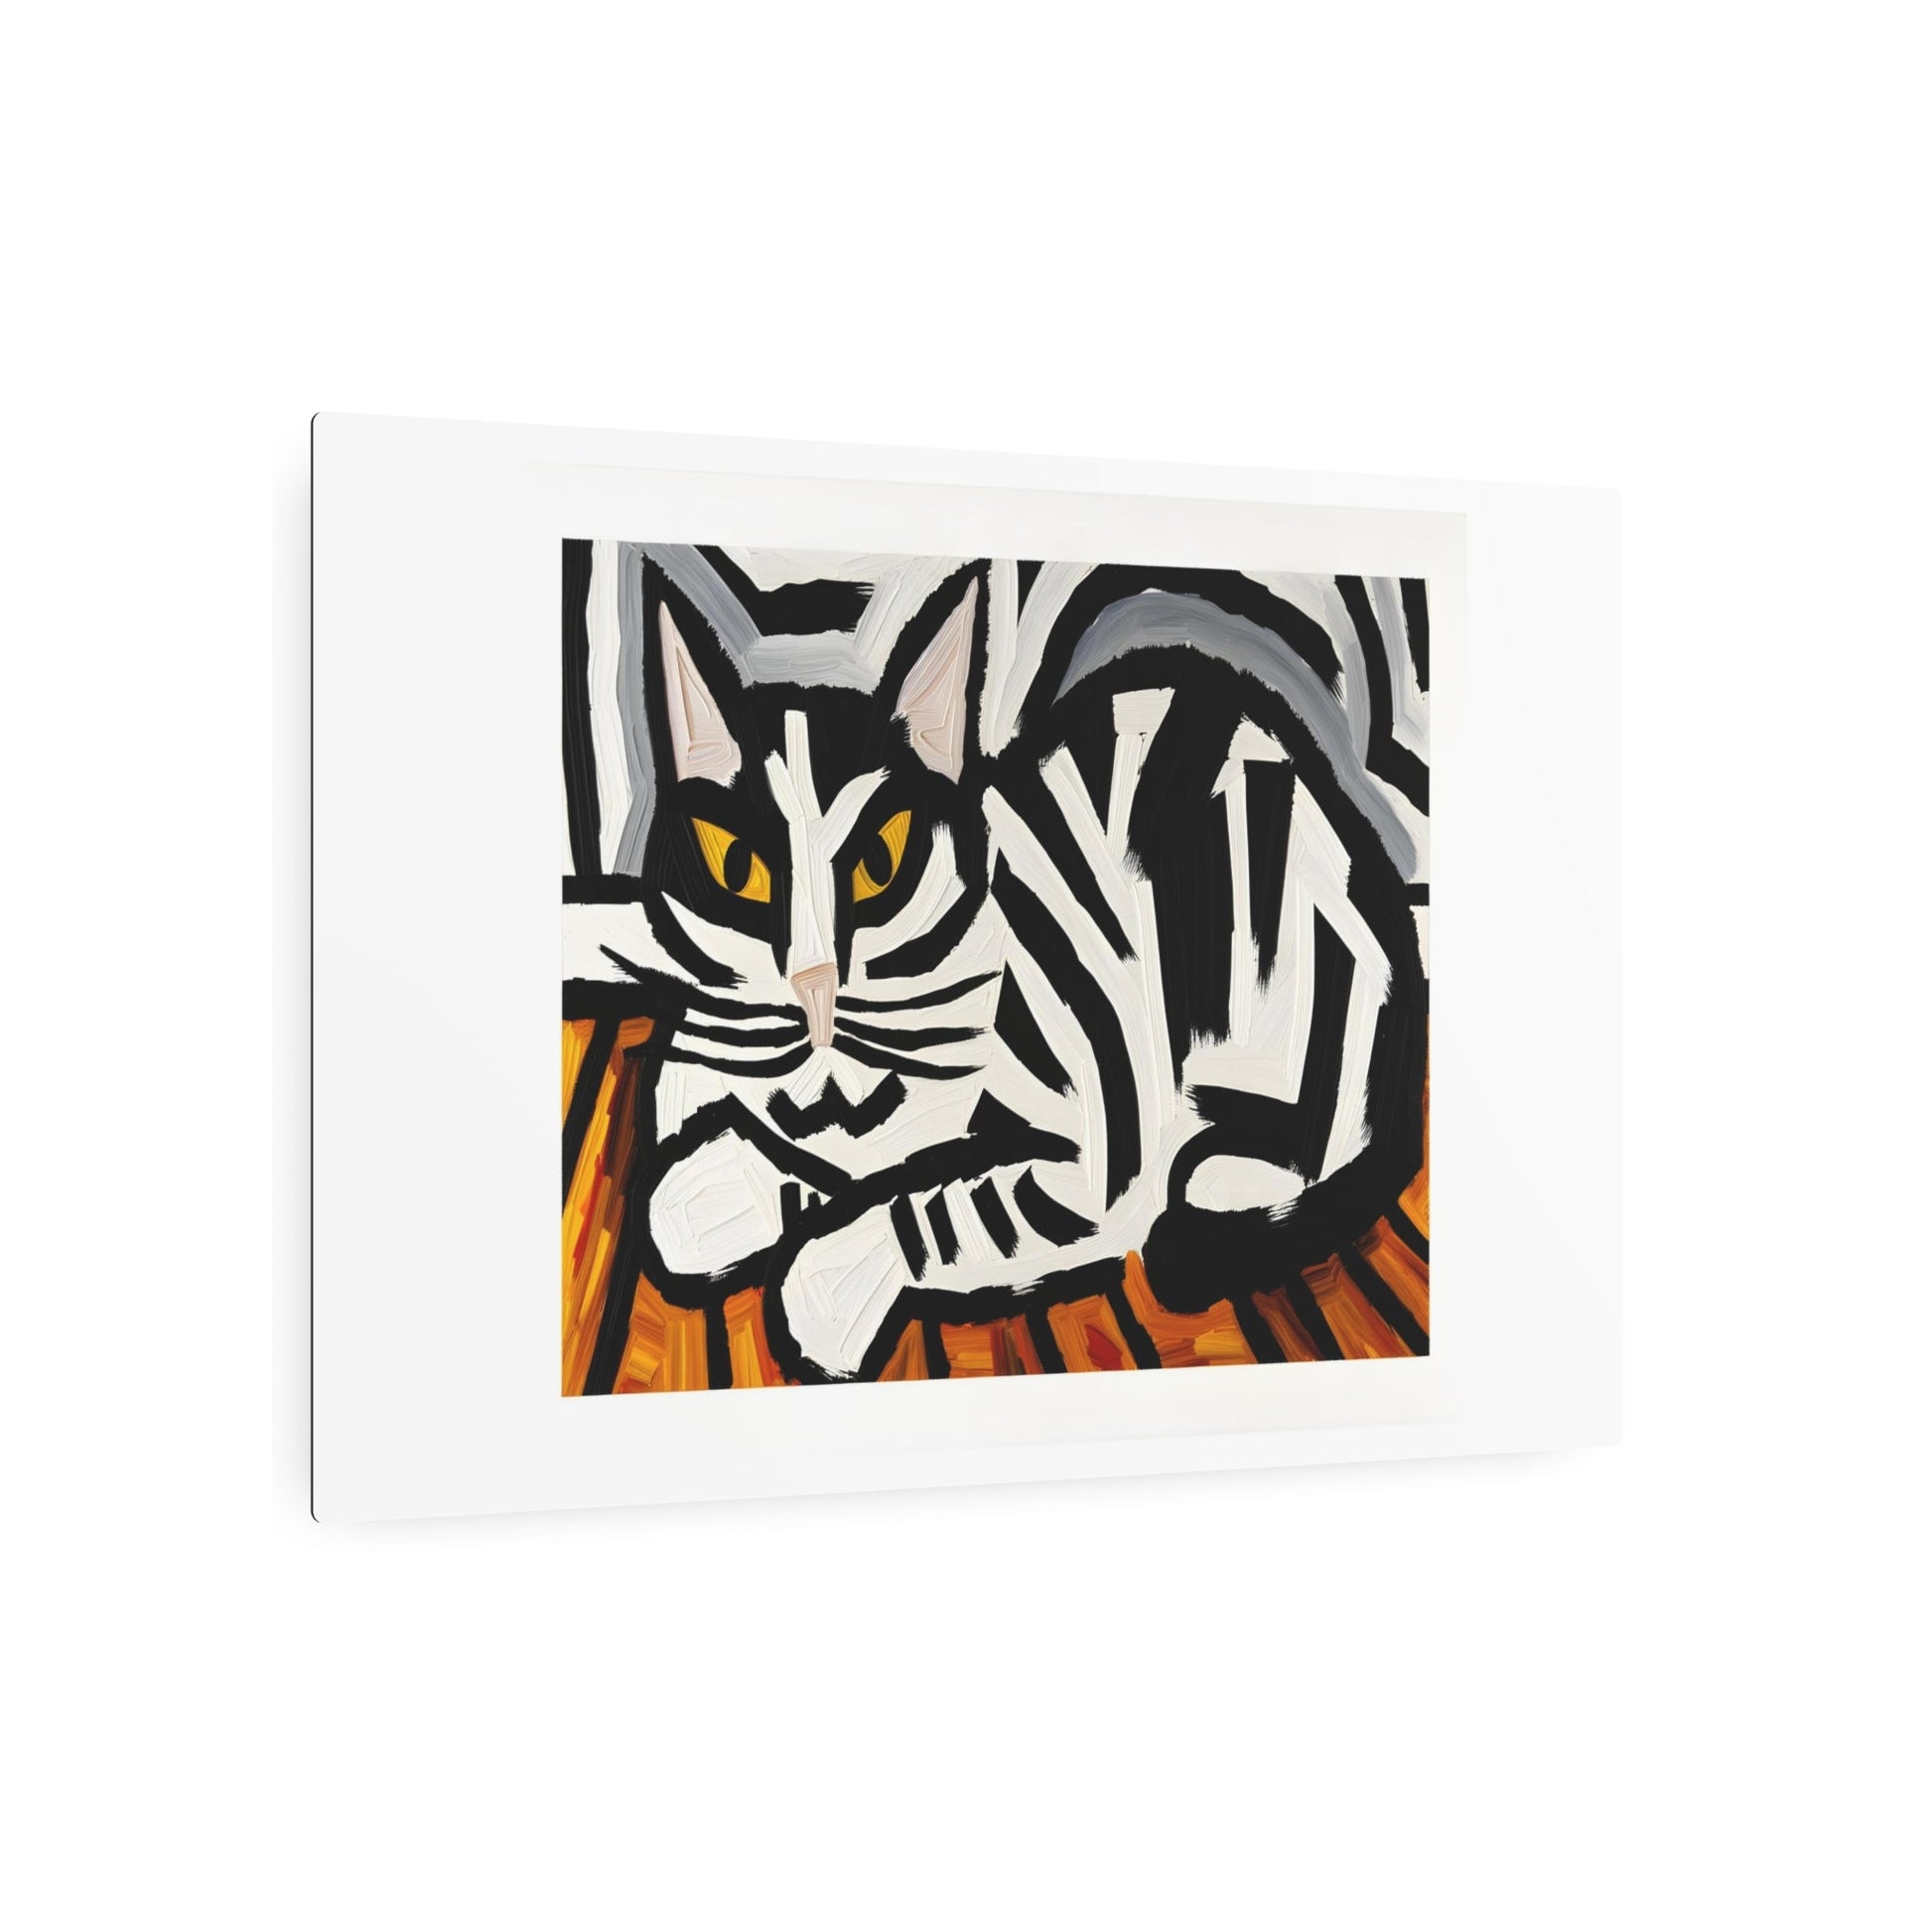 Metal Poster Art | "Expressionist Western Art Style: Emotional Black & White Striped Cat in Bold Distorted Shapes - Abstract Expressionism Artwork" - Metal Poster Art 36″ x 24″ (Horizontal) 0.12''